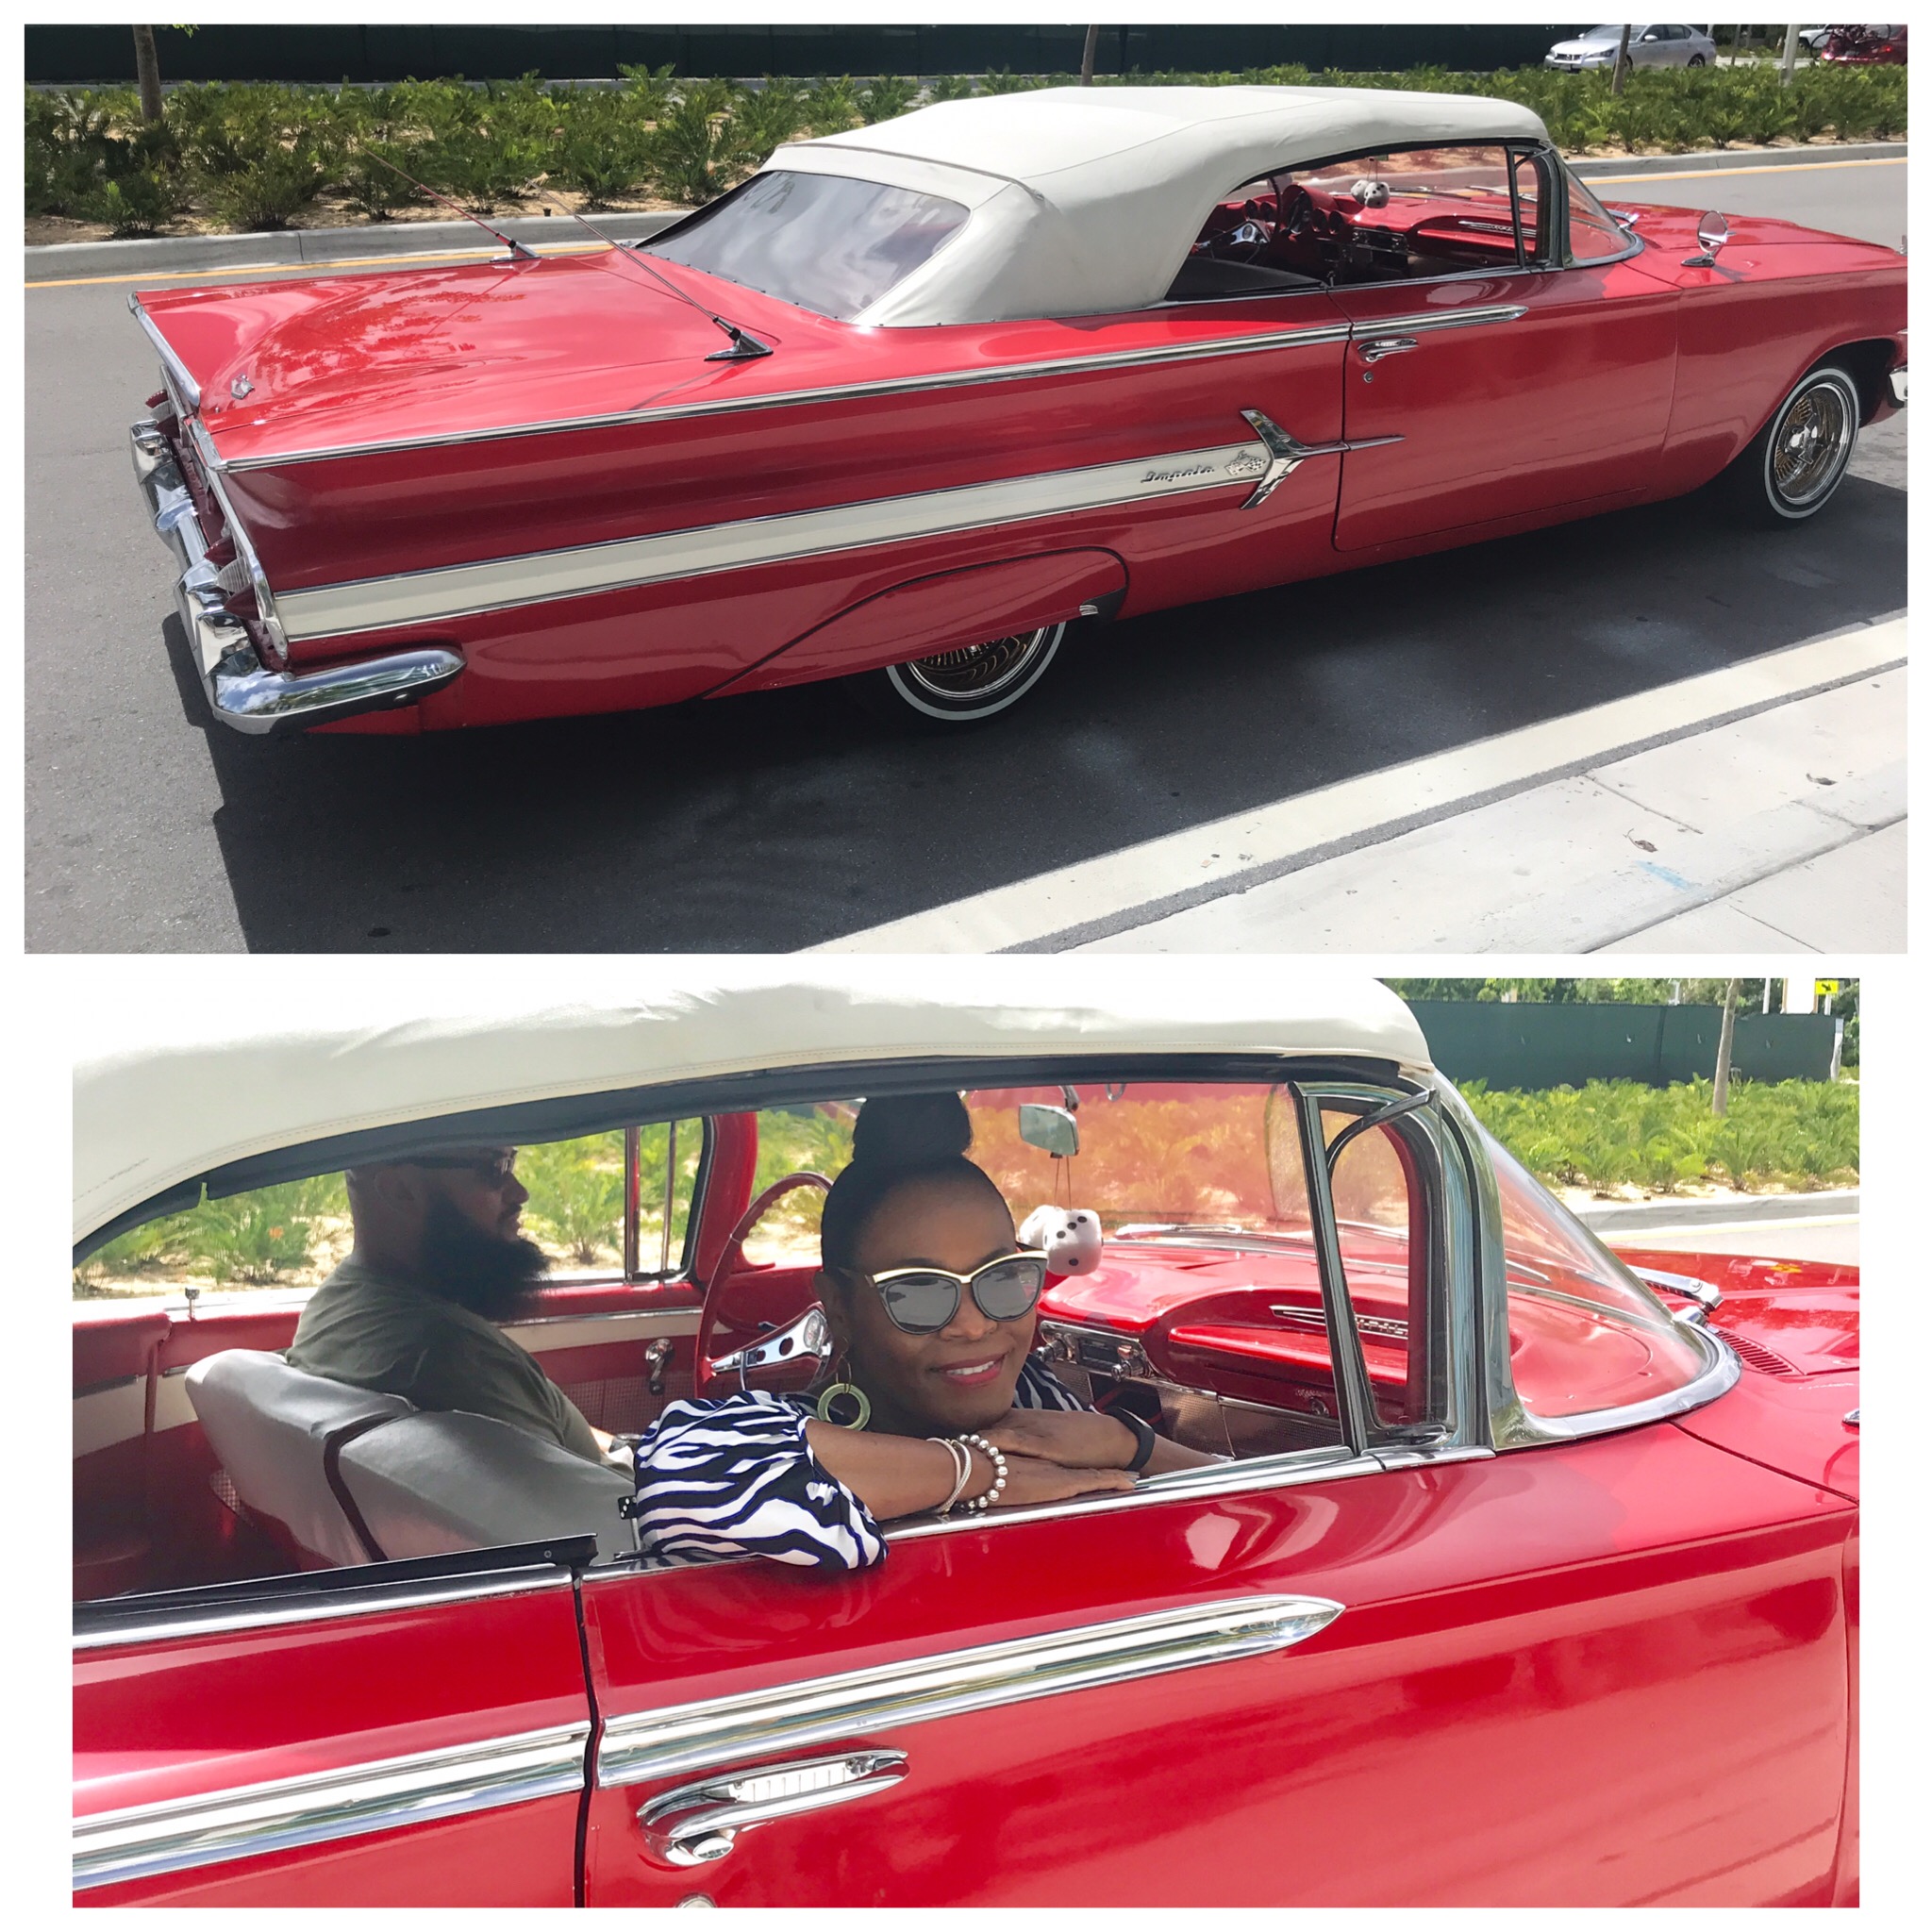 A Complimentary Ride in a 1961 Red Chevy Impala in Miami